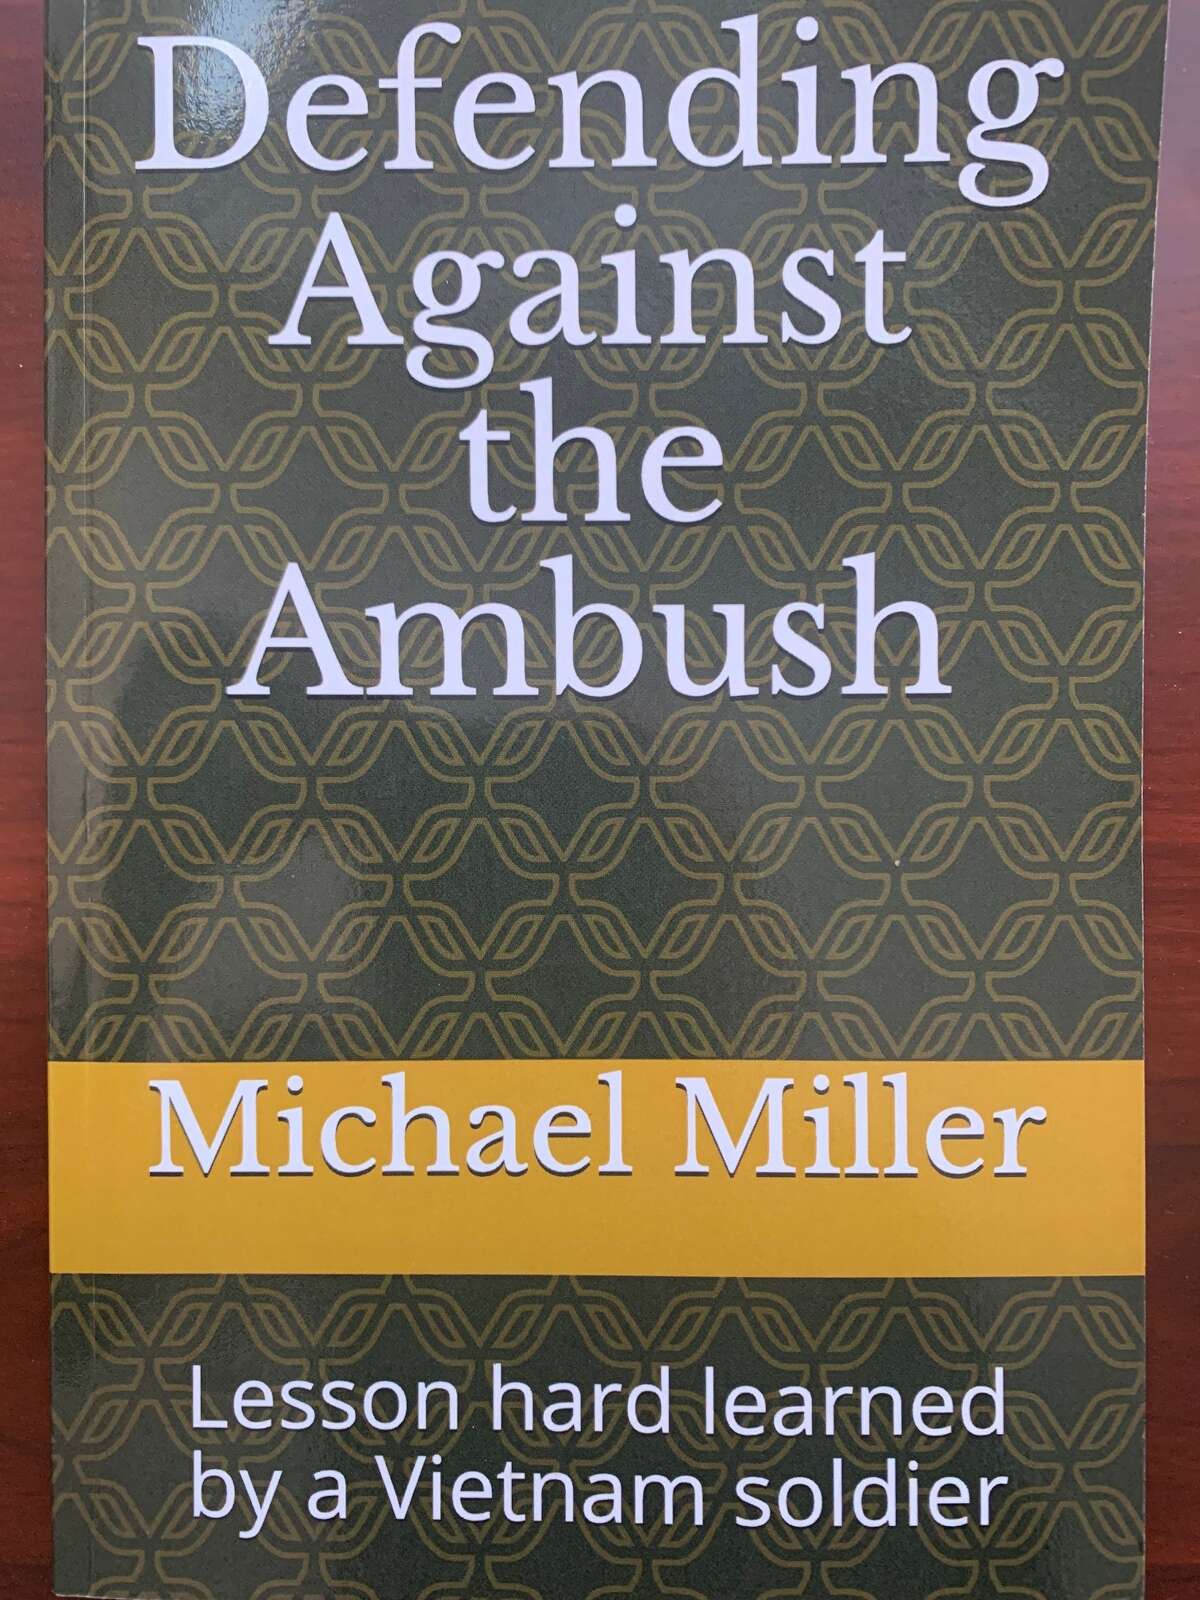 Midland resident Michael Miller, a Vietnam veteran, published his second book, Defending Against the Ambush: Lessons hard learned by a Vietnam soldier, in December 2021.